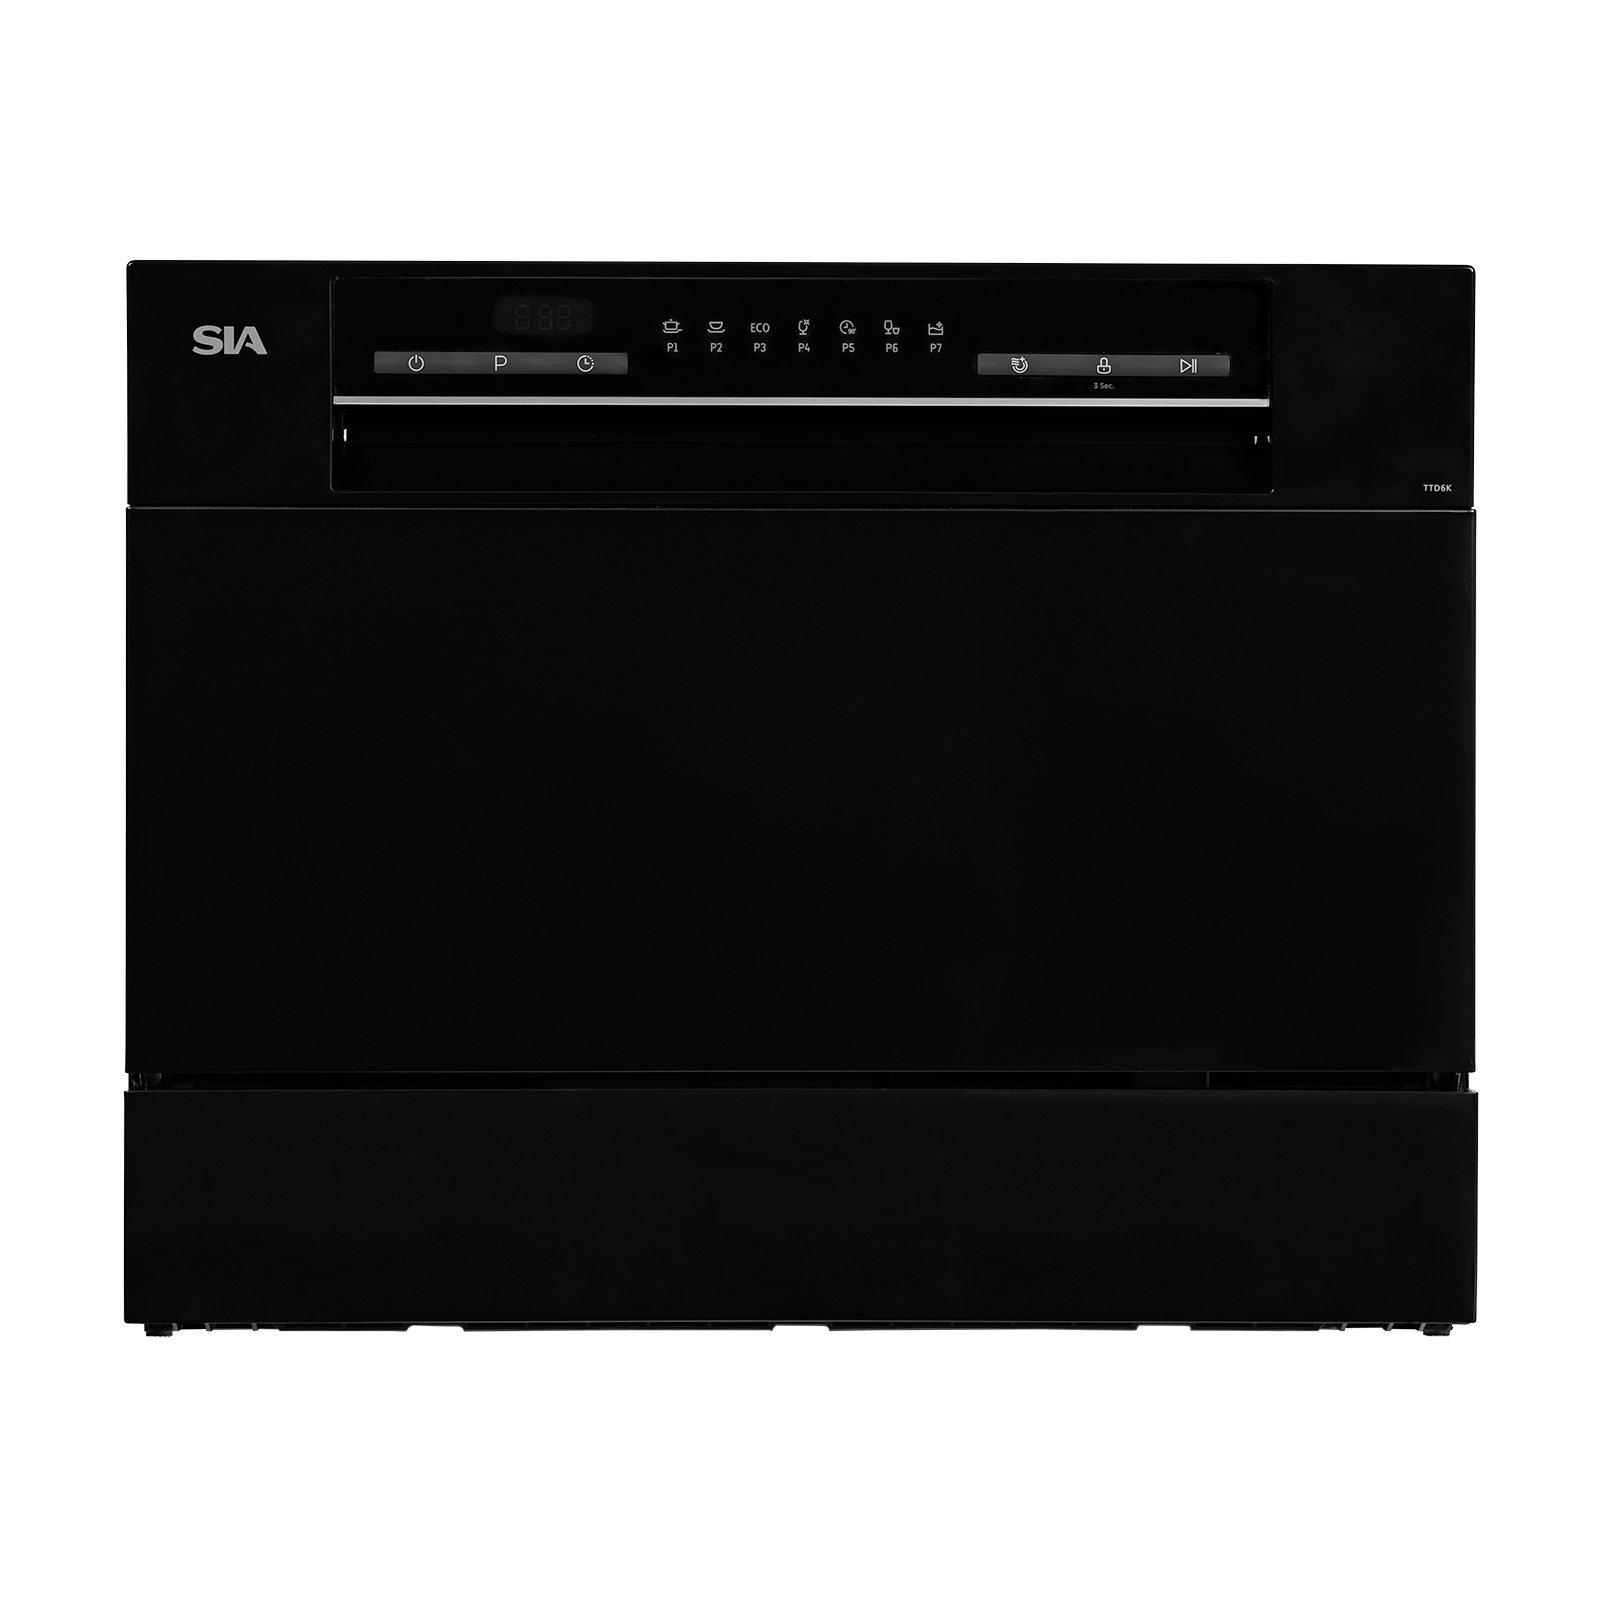 Table Top Dishwasher In Black, 6 Places 6 Programmes TTD6K